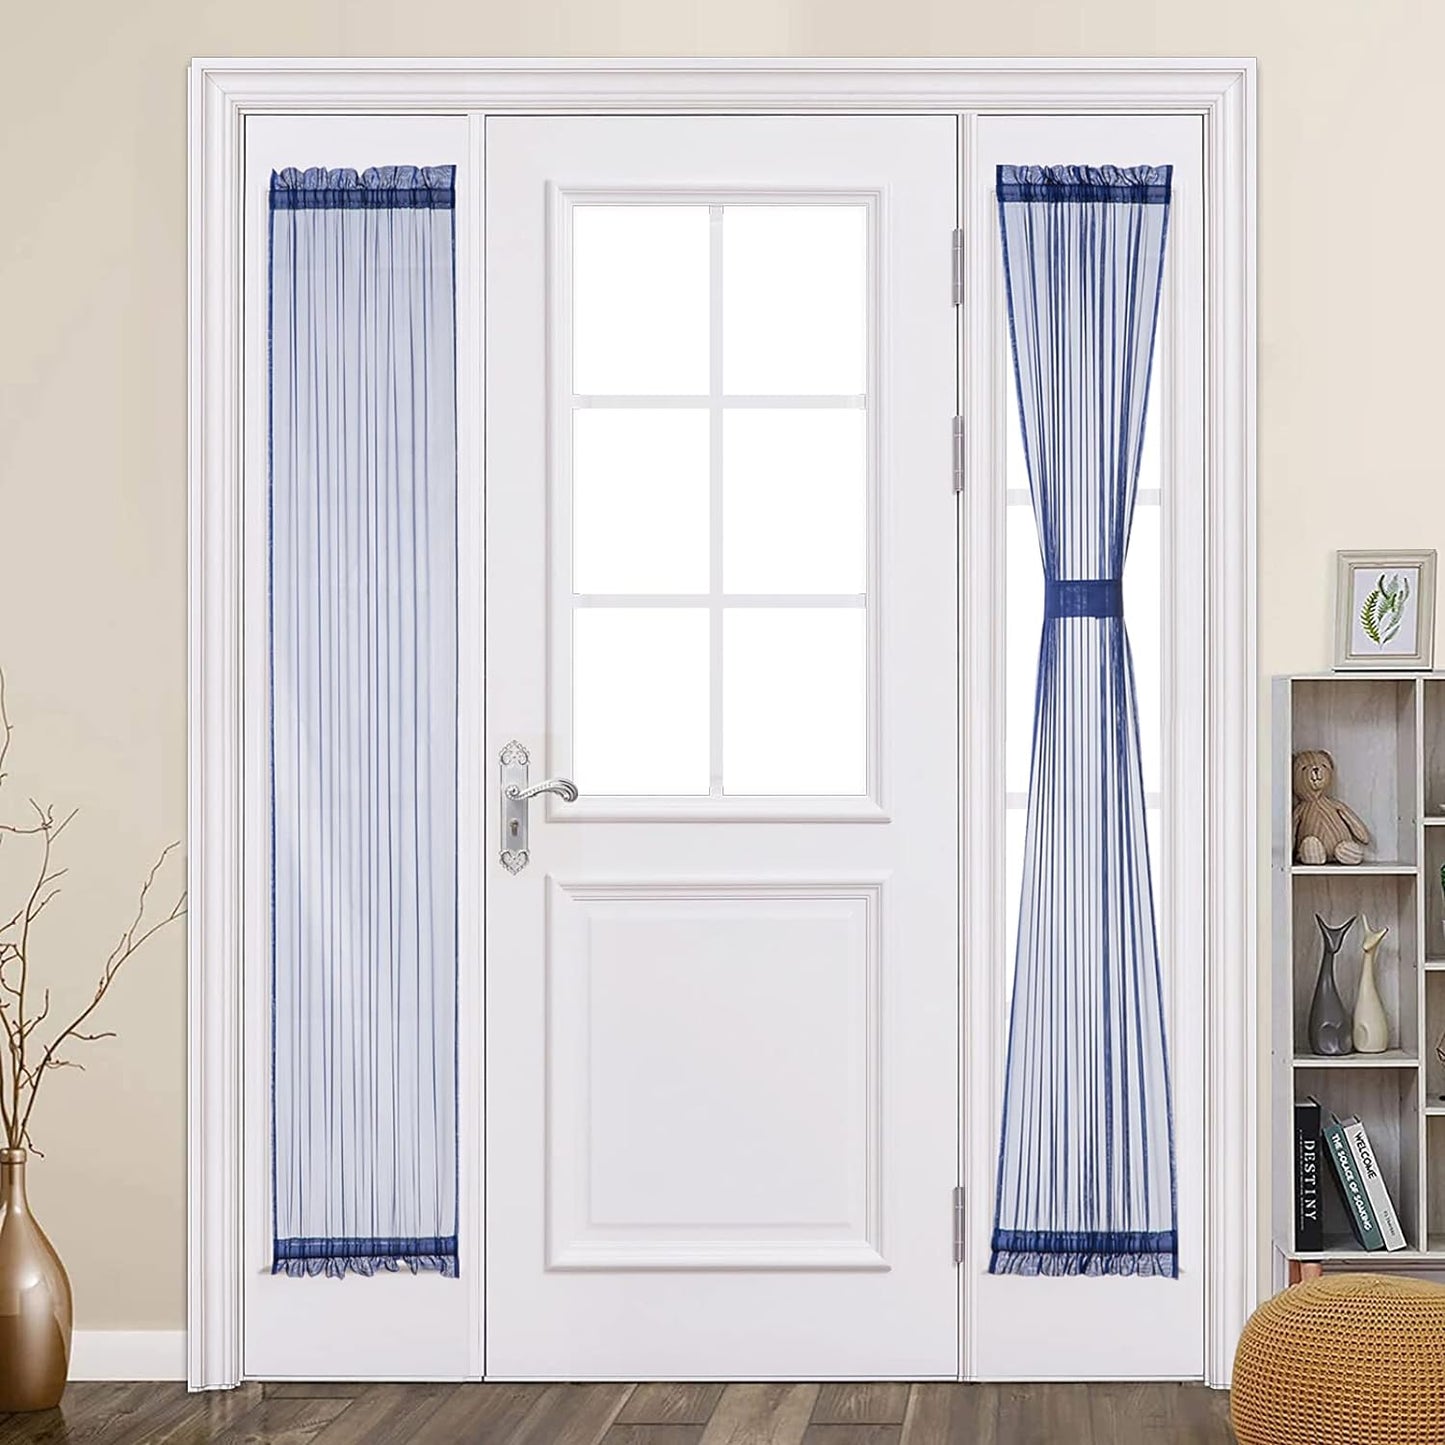 MIULEE French Door Sheer Curtains for Front Back Patio Glass Door Light Filtering Window Treatment with 2 Tiebacks 54 Wide and 72 Inches Length, White, Set of 2  MIULEE Navy Blue 25"W X 72"L 